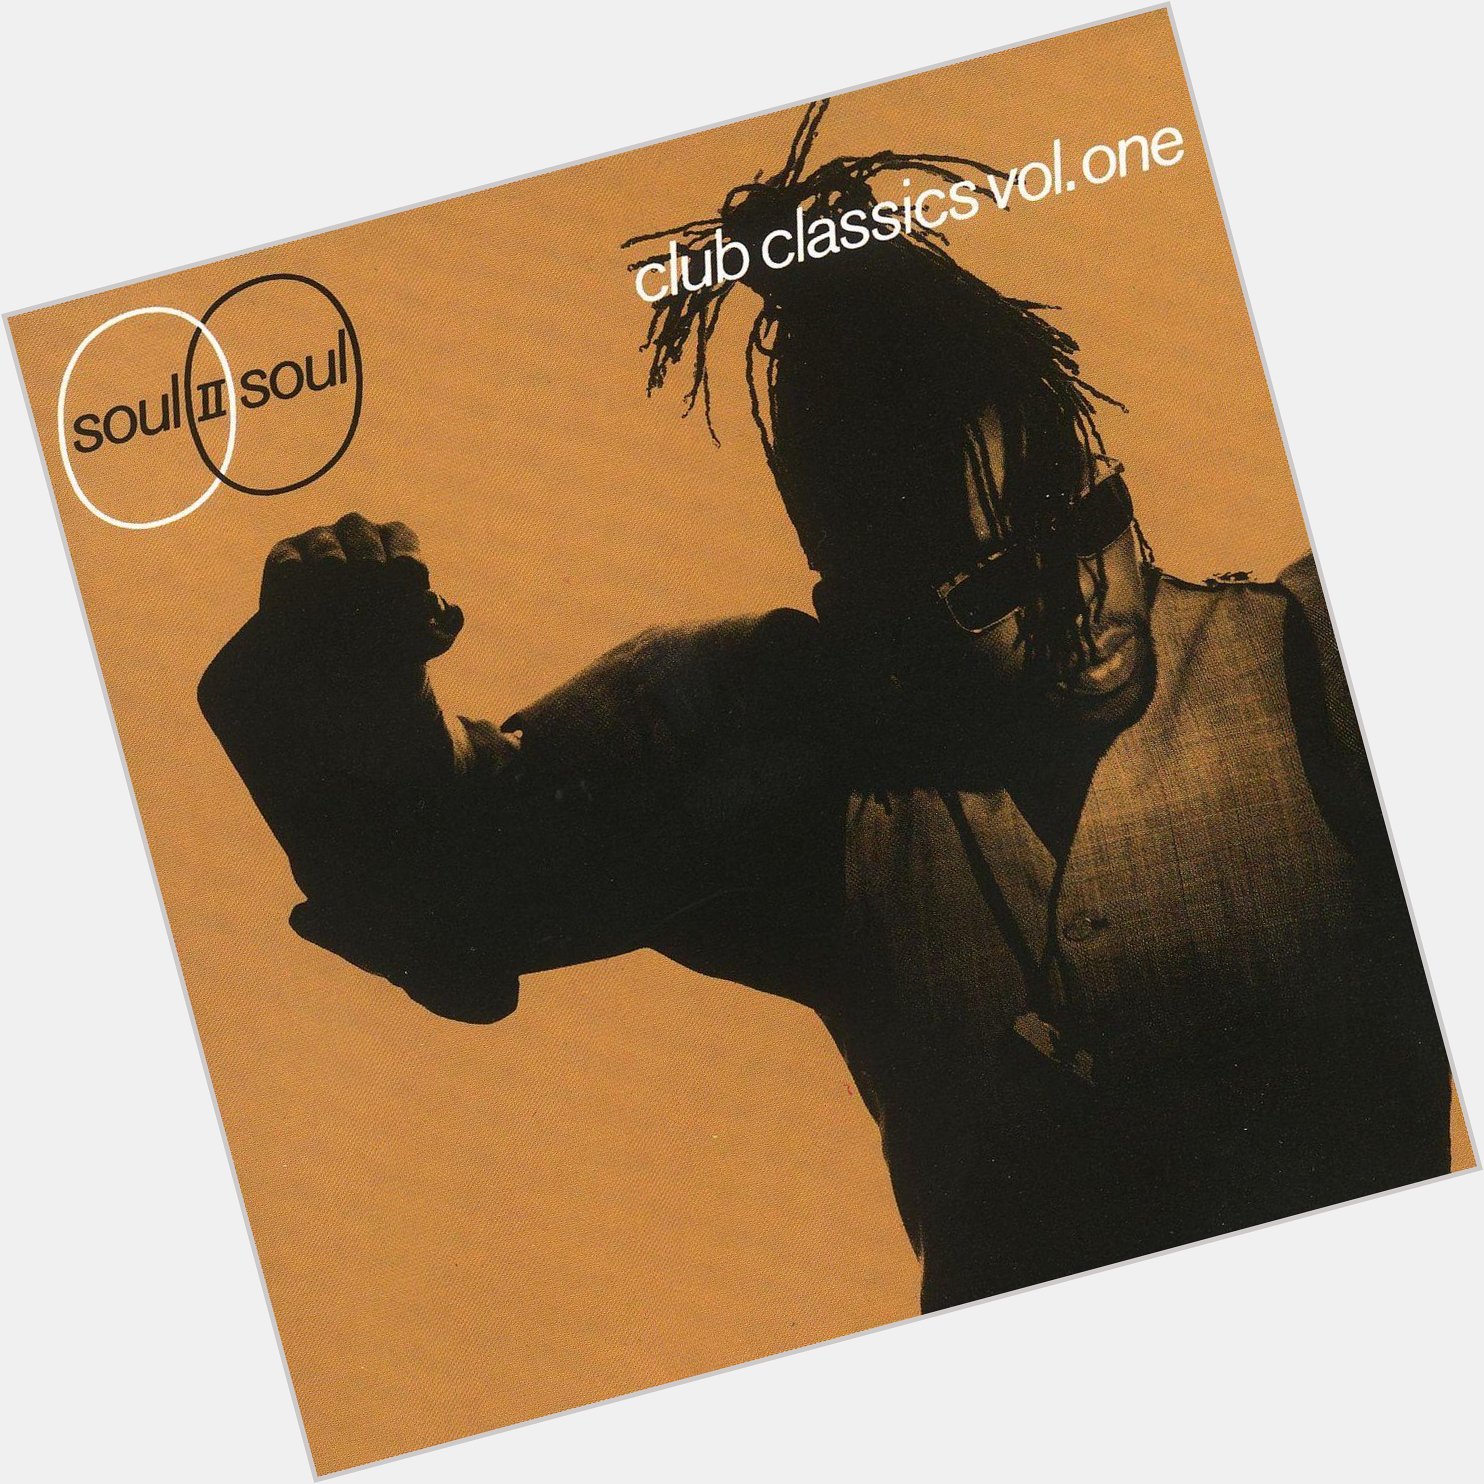 A very Happy Birthday to Soul II Soul\s Jazzie B producer of defining UK dance music classics

 